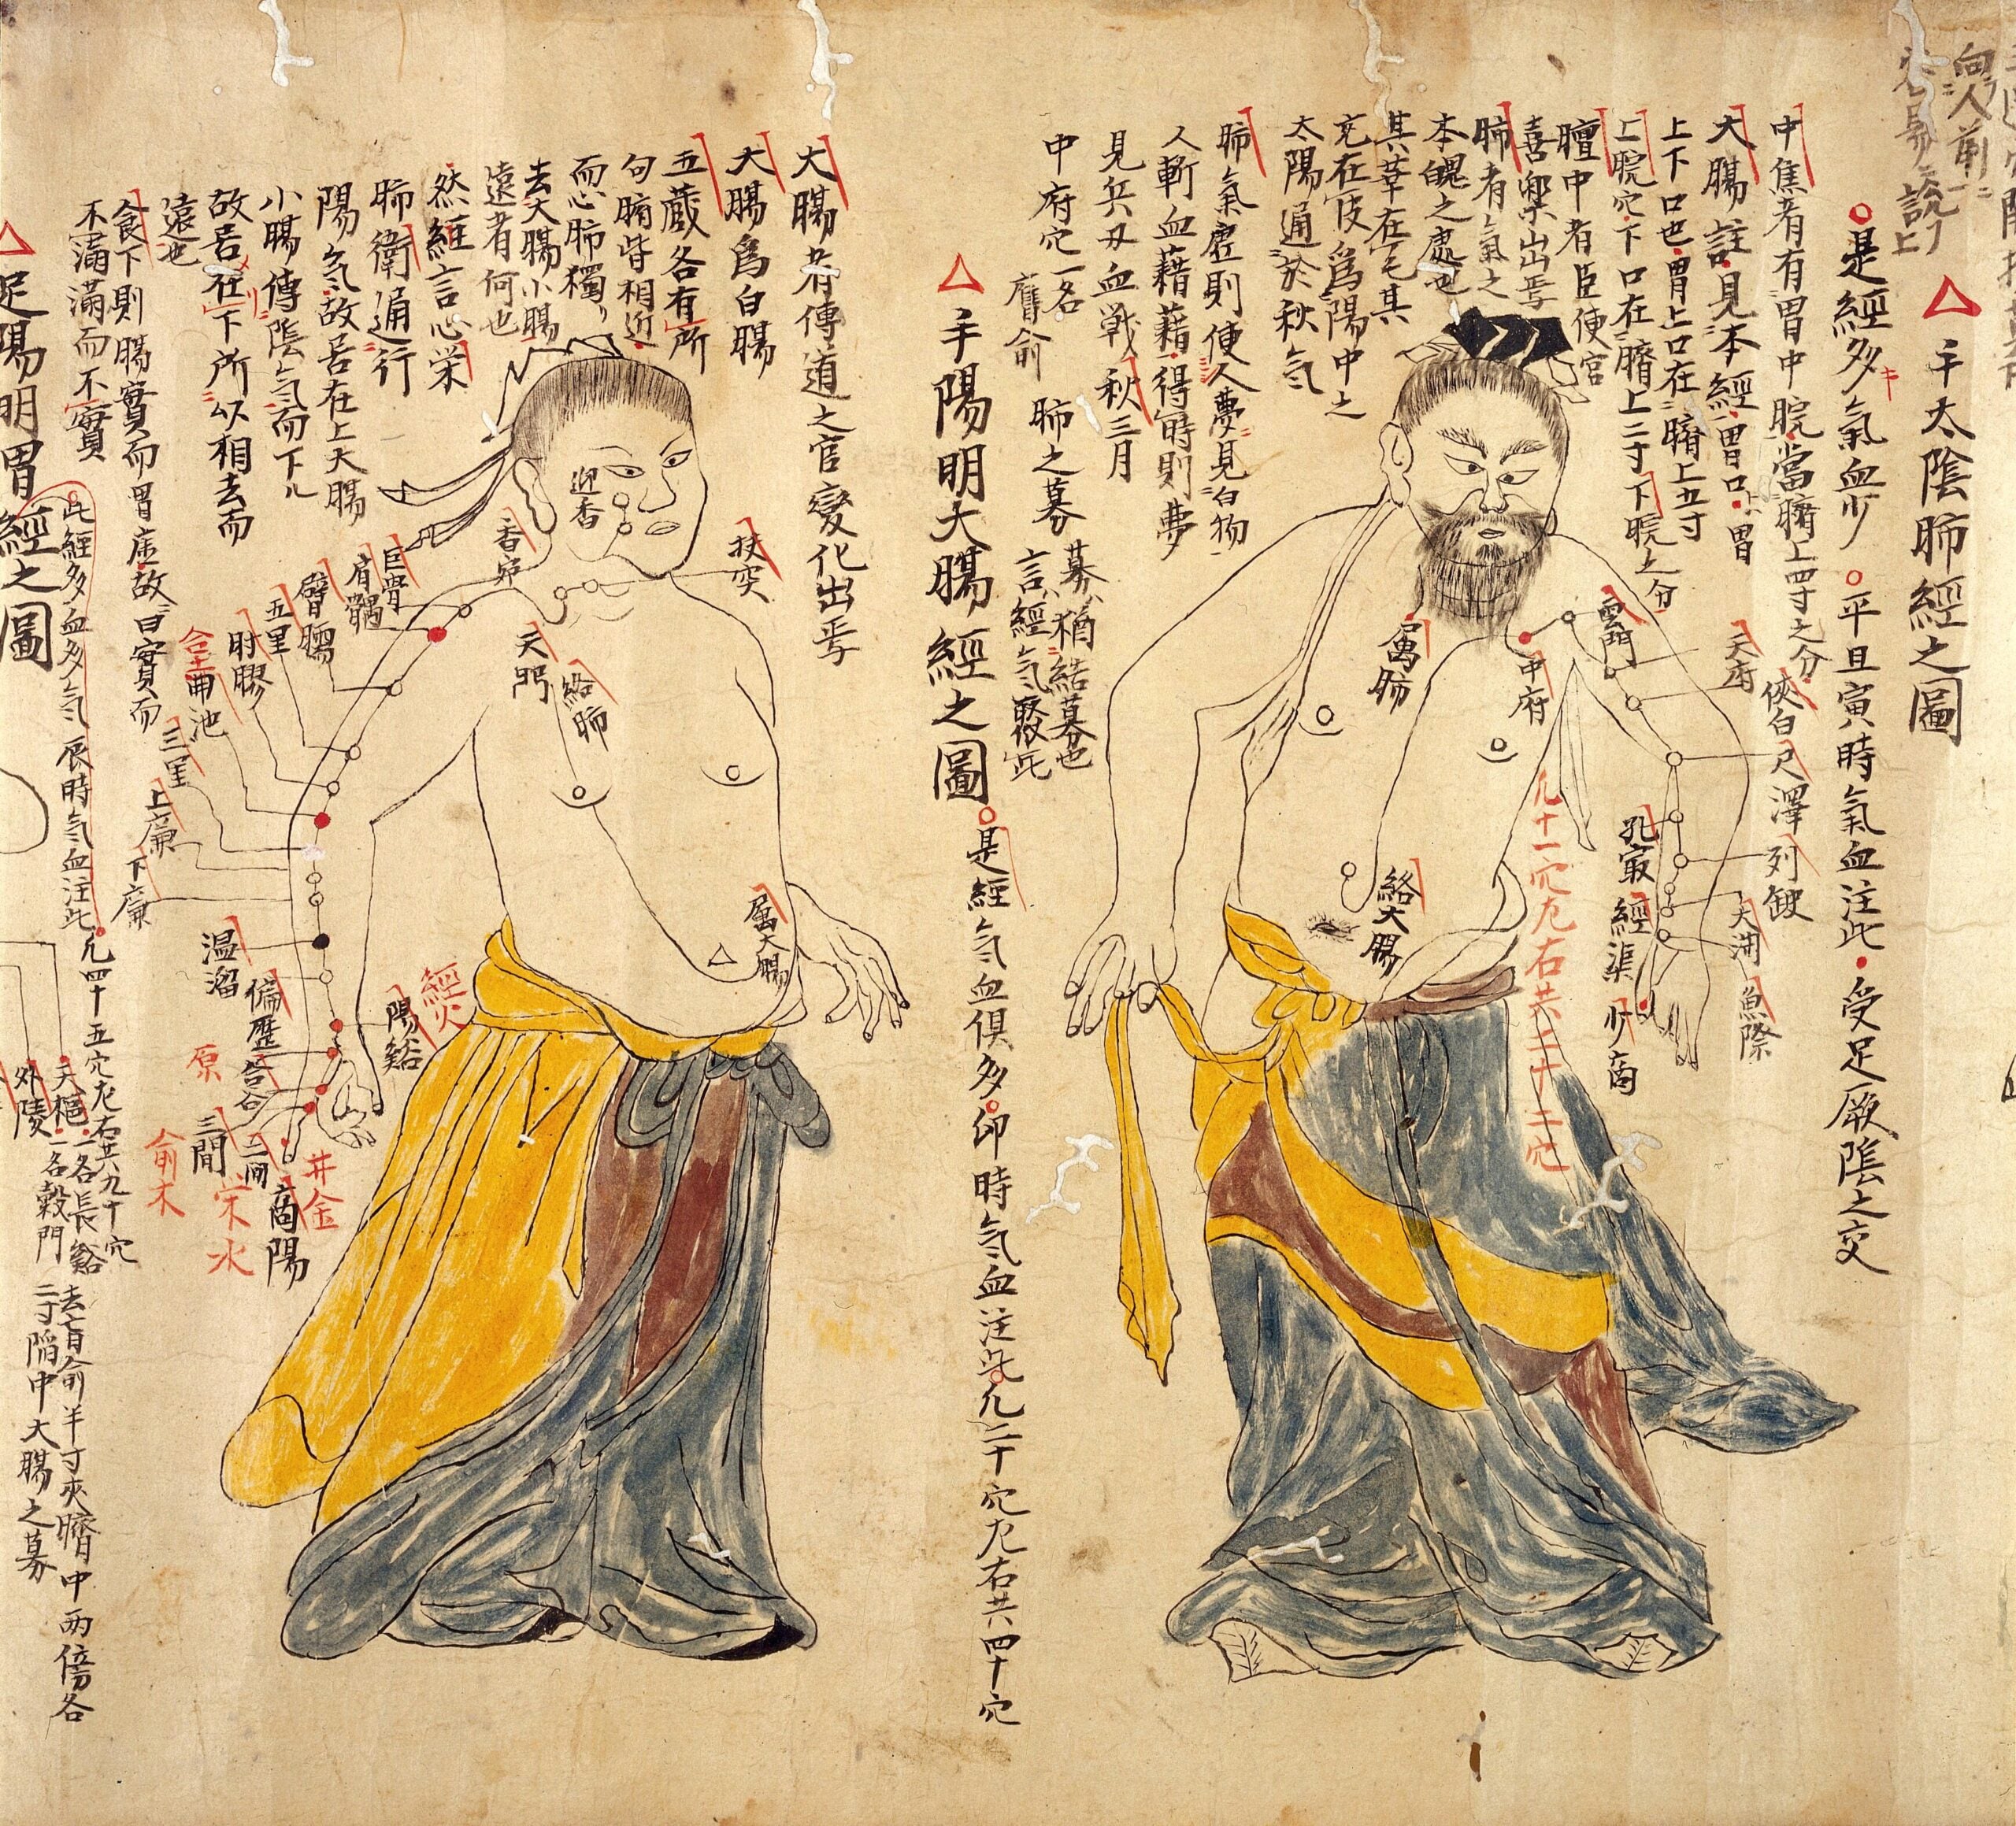 Illustration of two men, identifying some acupuncture points on their bodies, with numerous annotations in Chinese